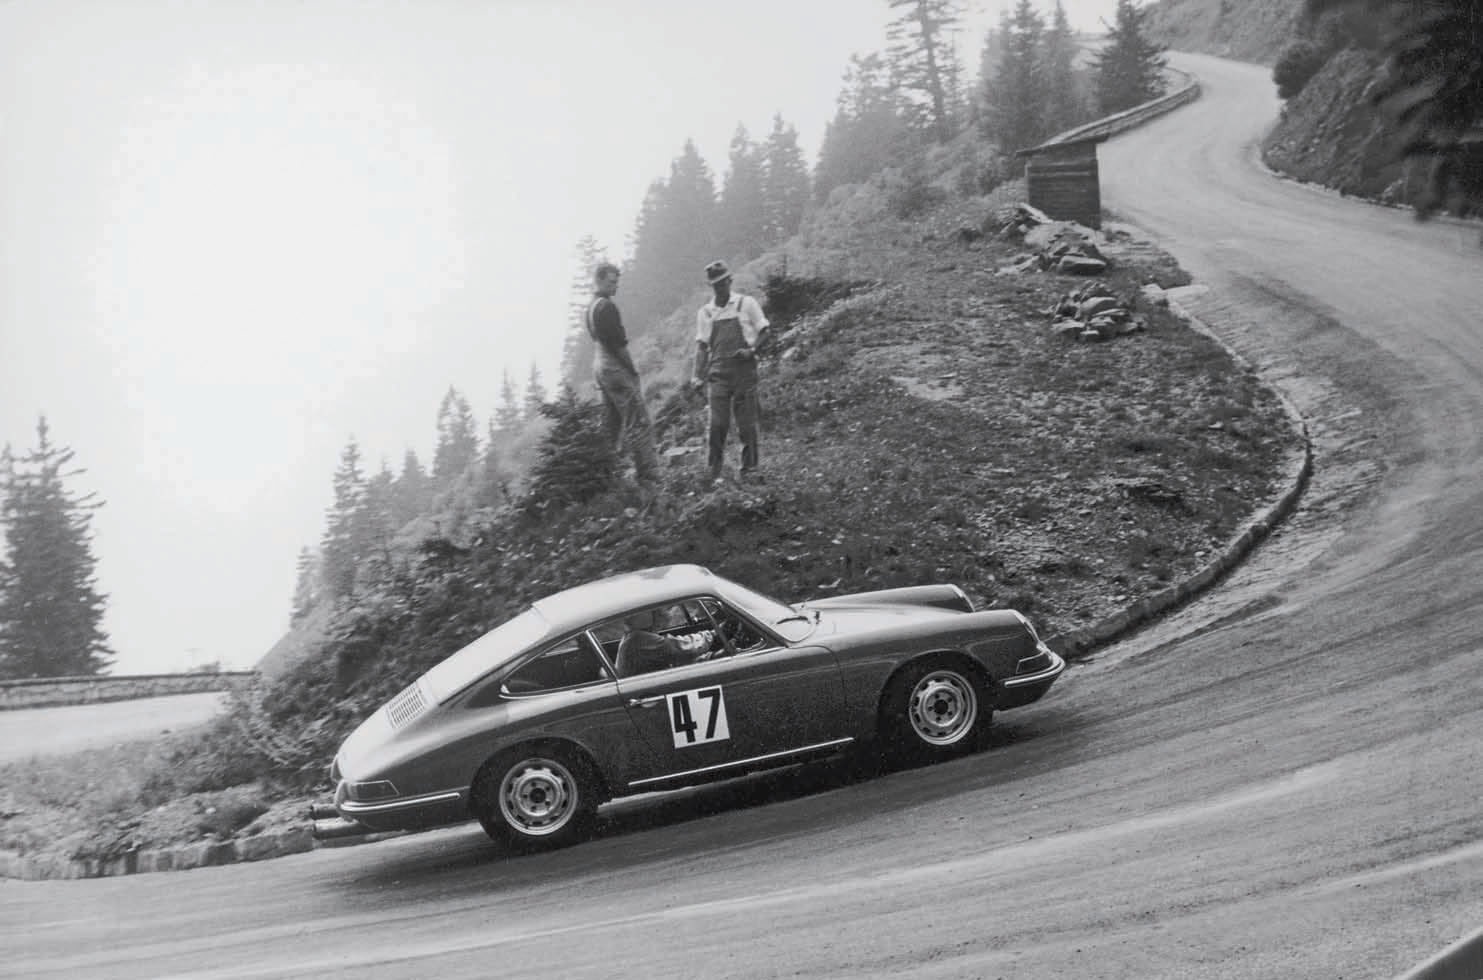 On the Rossfeld hillclimb in 1966, Eberhard Mahle drove this 166-horsepower 911 to victory. At season end, he placed first in the European Hillclimb Championship. Porsche Archiv